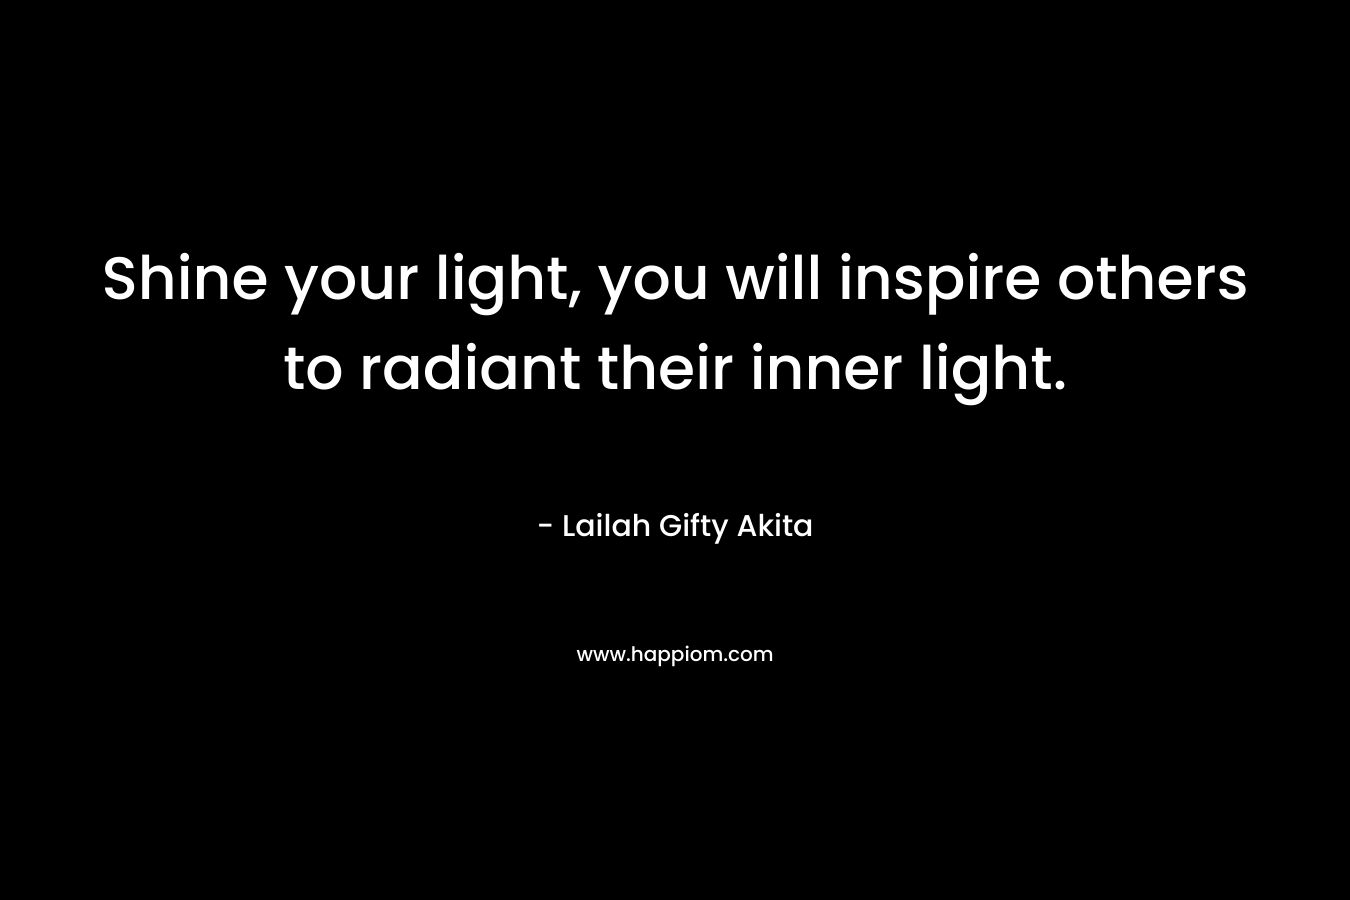 Shine your light, you will inspire others to radiant their inner light. – Lailah Gifty Akita